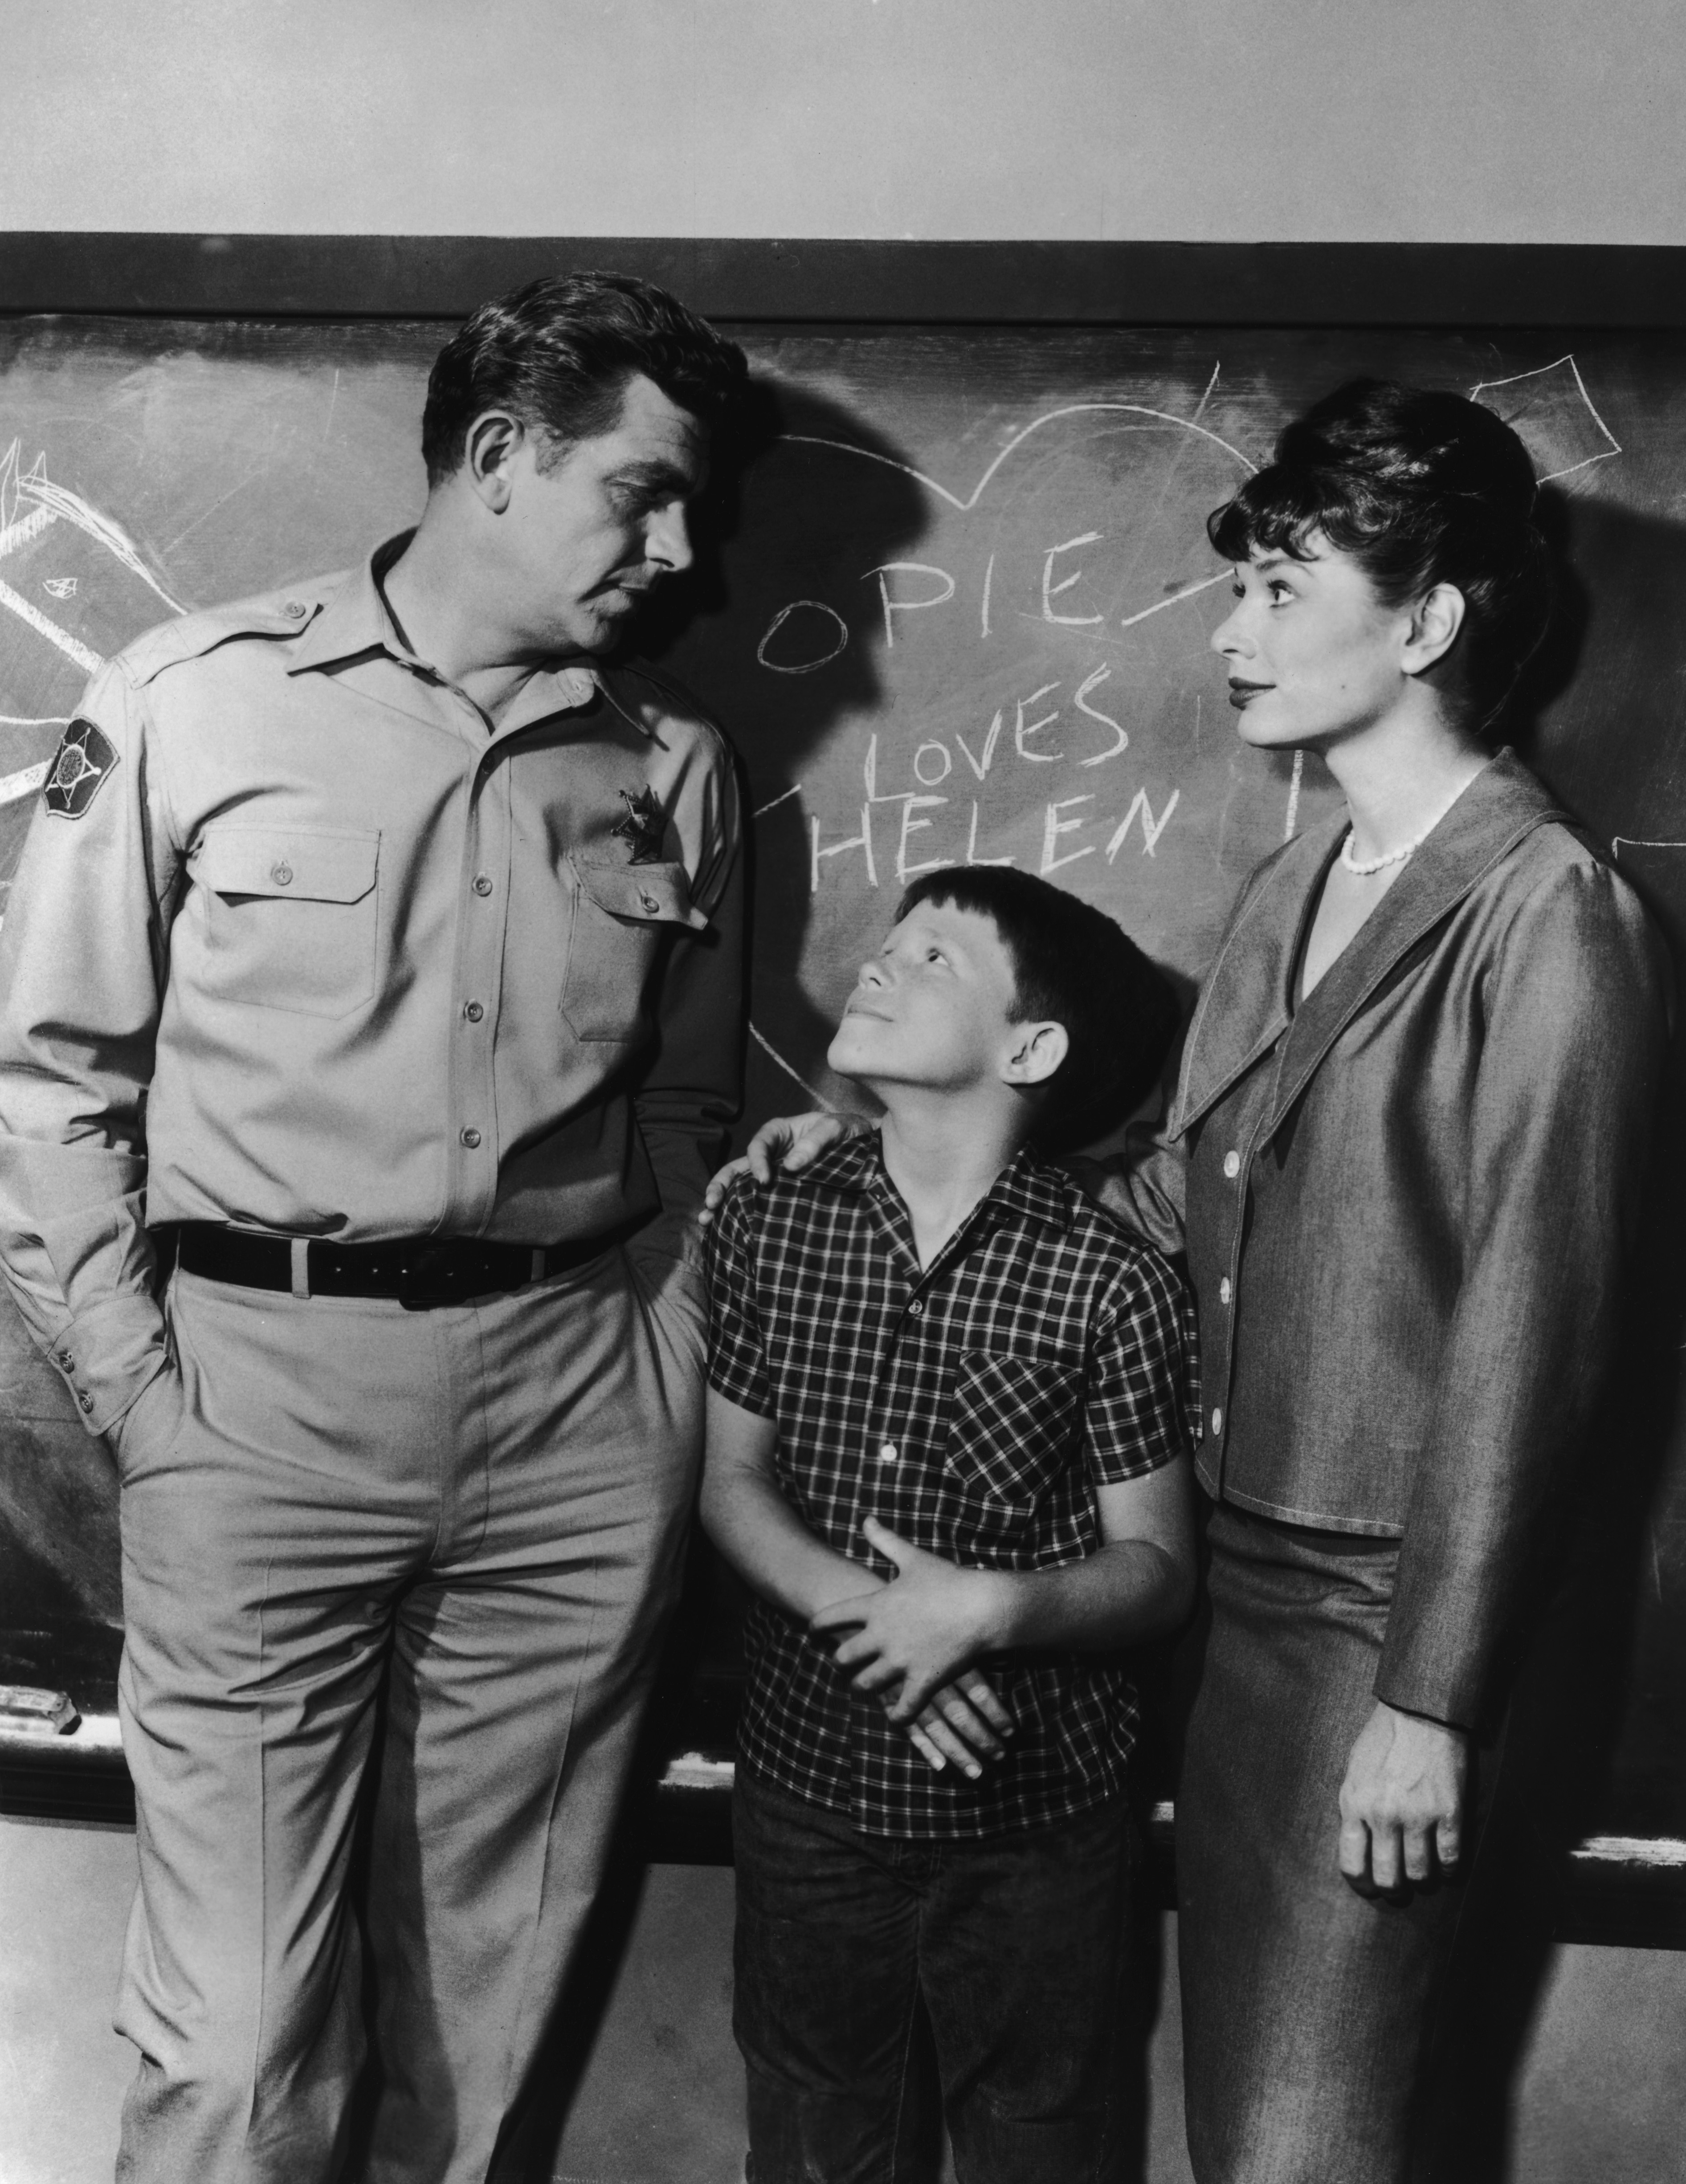 Still of Ron Howard, Aneta Corsaut and Andy Griffith in The Andy Griffith Show (1960)